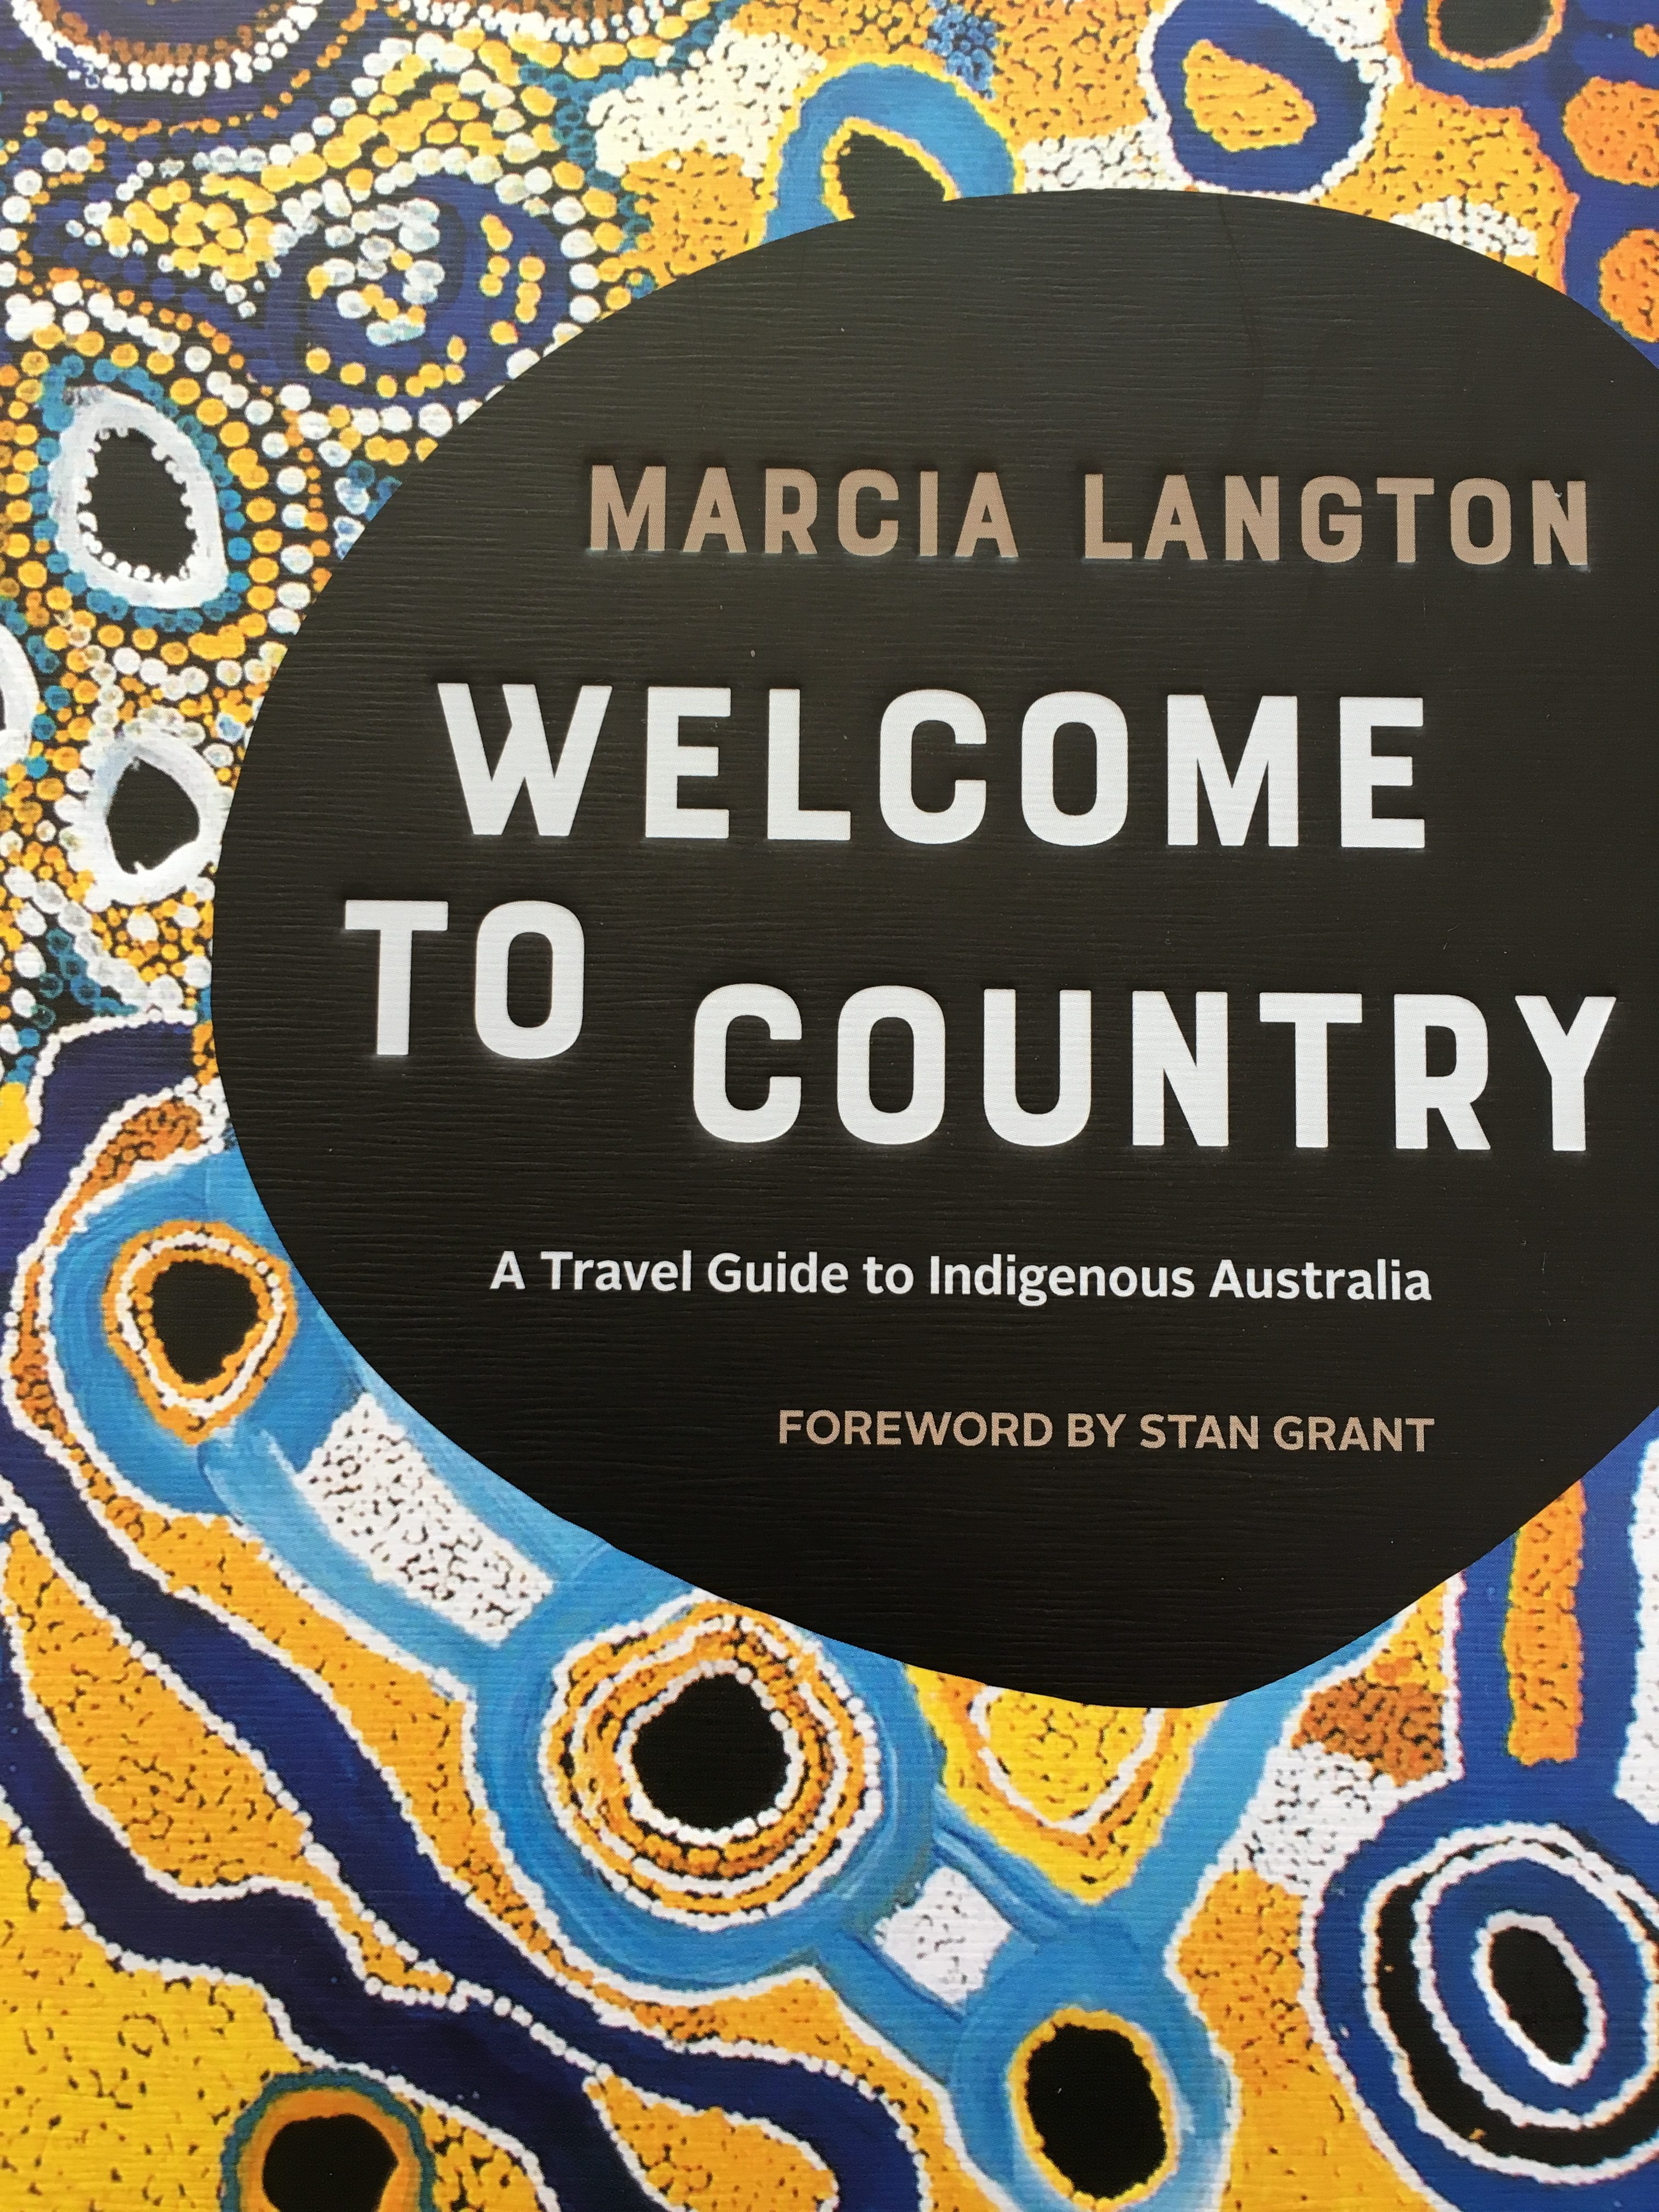 Book Cover of Marcia Langton's Welcome To Country.